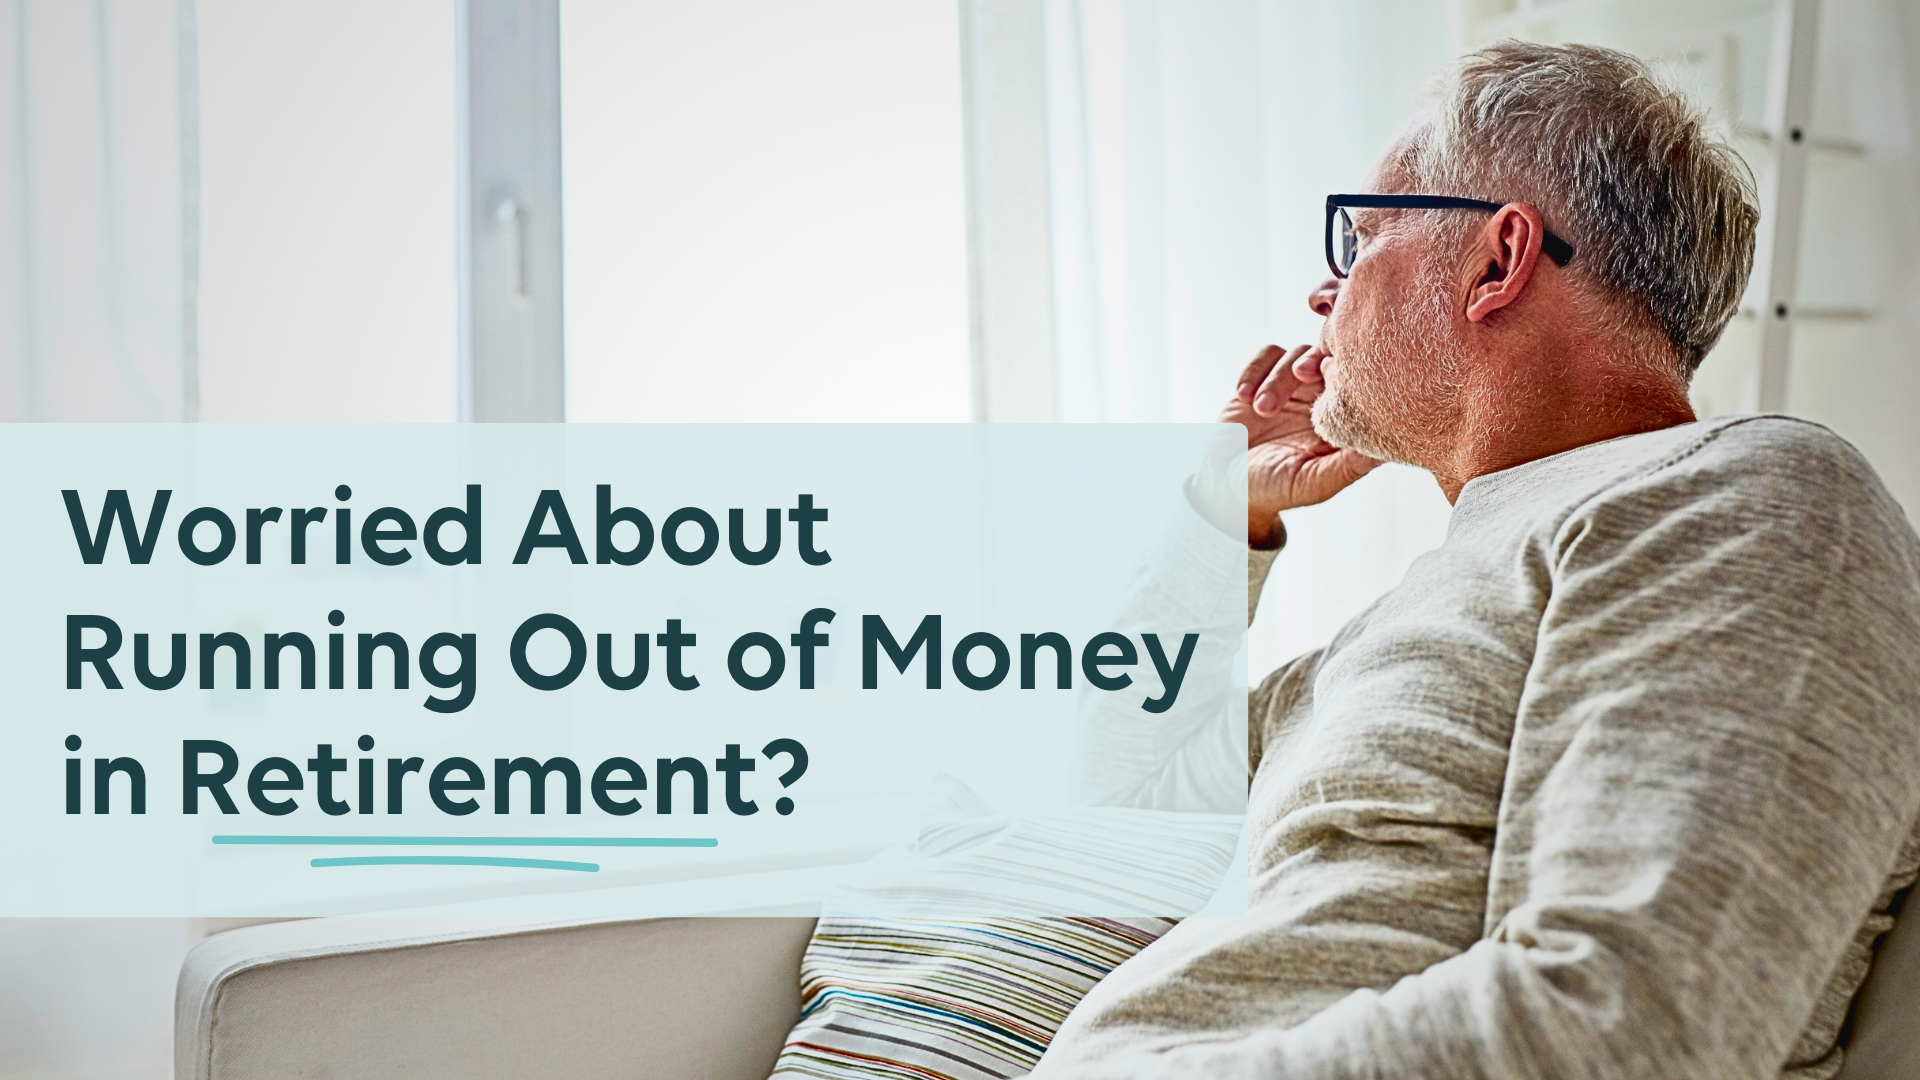 Worried About Running Out of Money in Retirement?